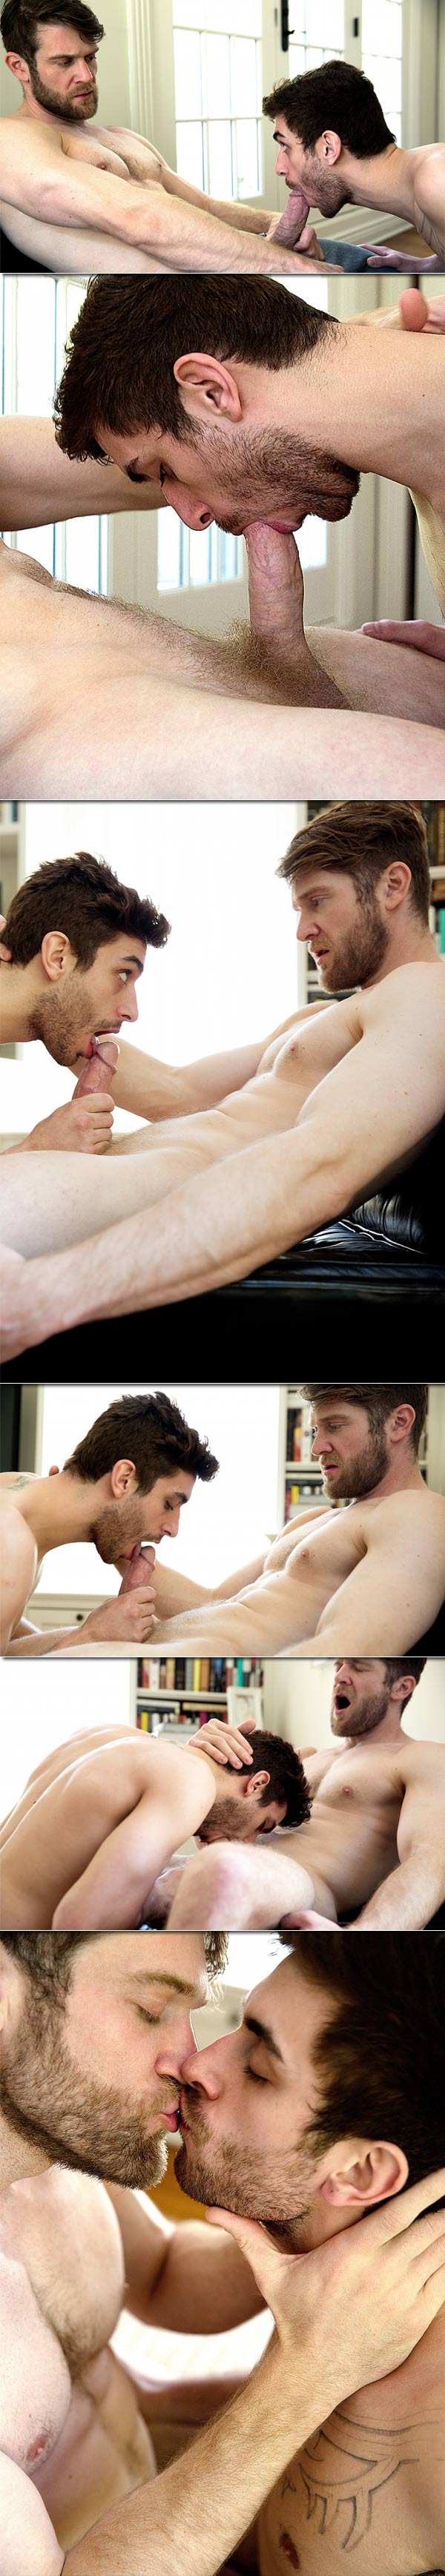 Colby Keller Plows Dillon Rossi at CockyBoys.com